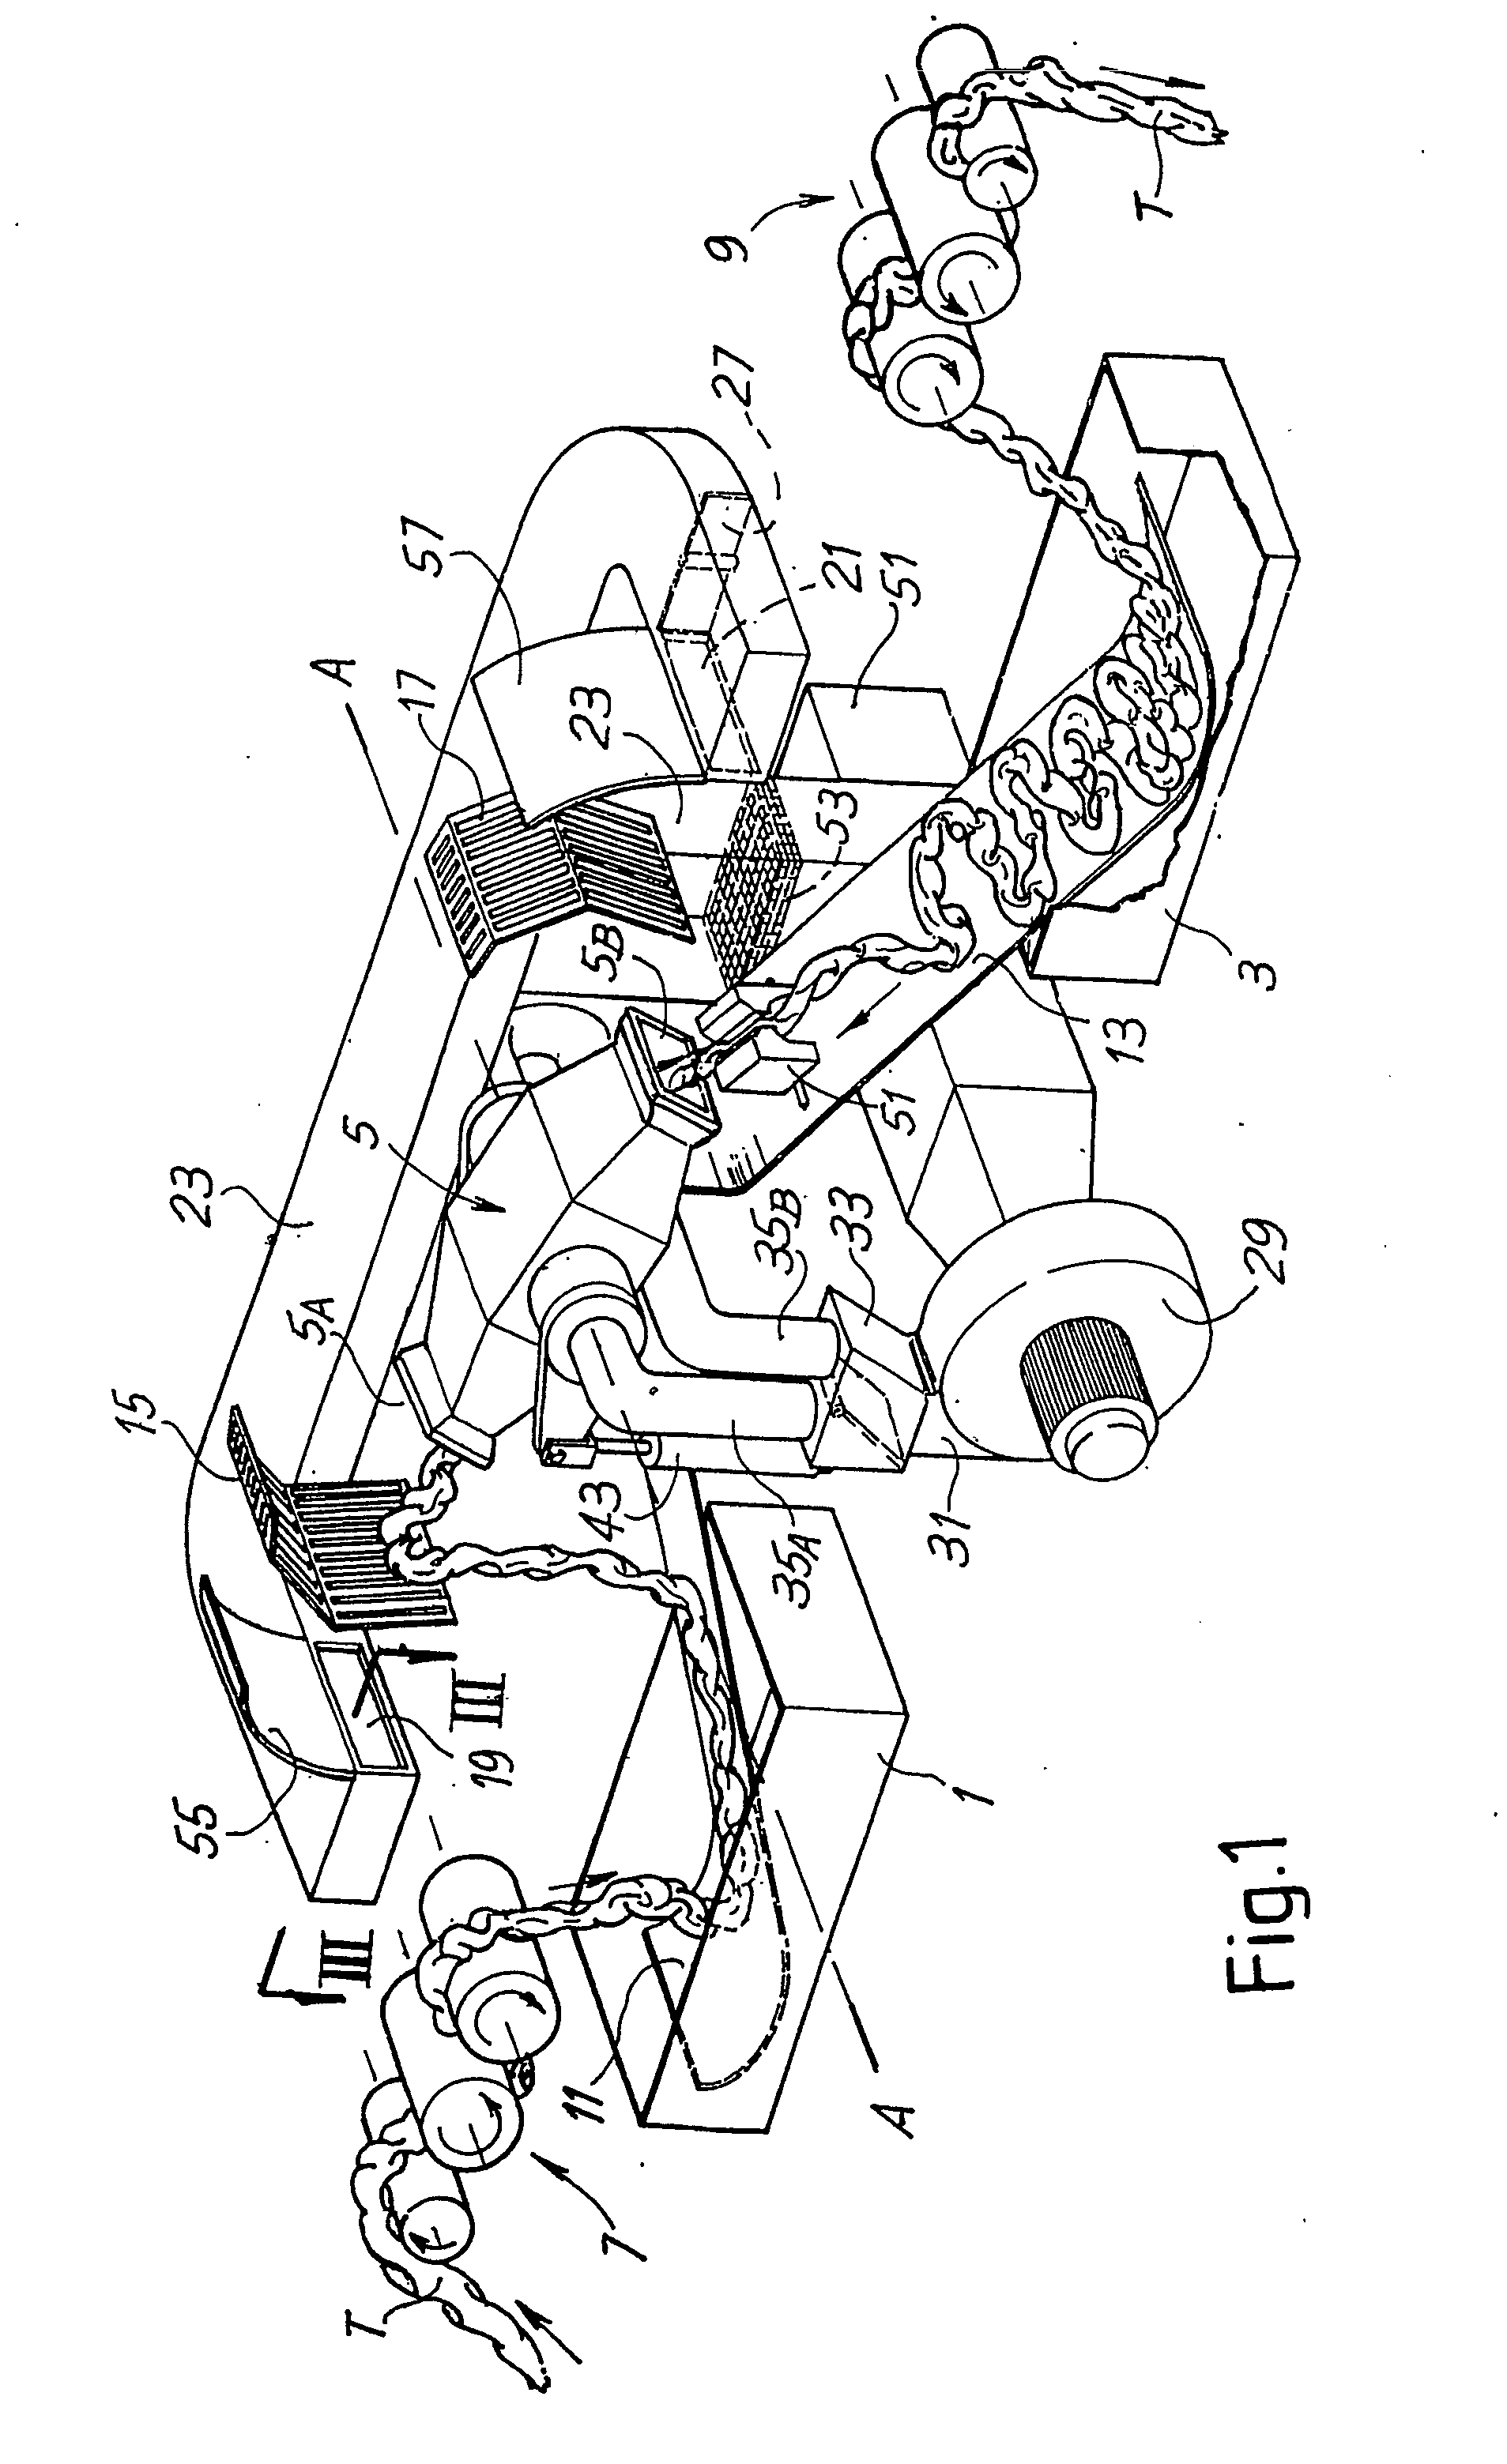 Machine and method for the continuous treatment of a fabric